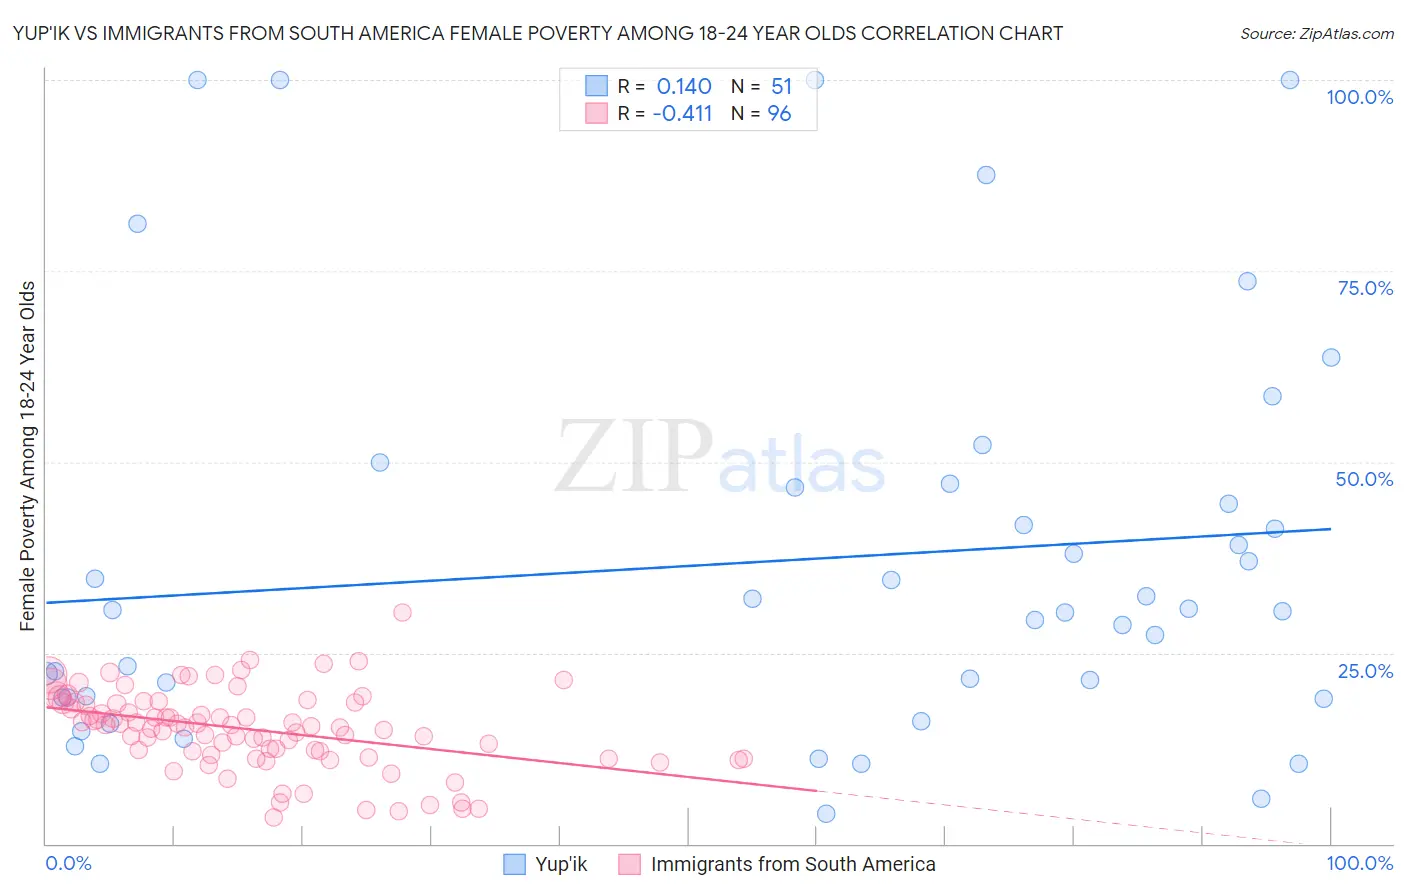 Yup'ik vs Immigrants from South America Female Poverty Among 18-24 Year Olds